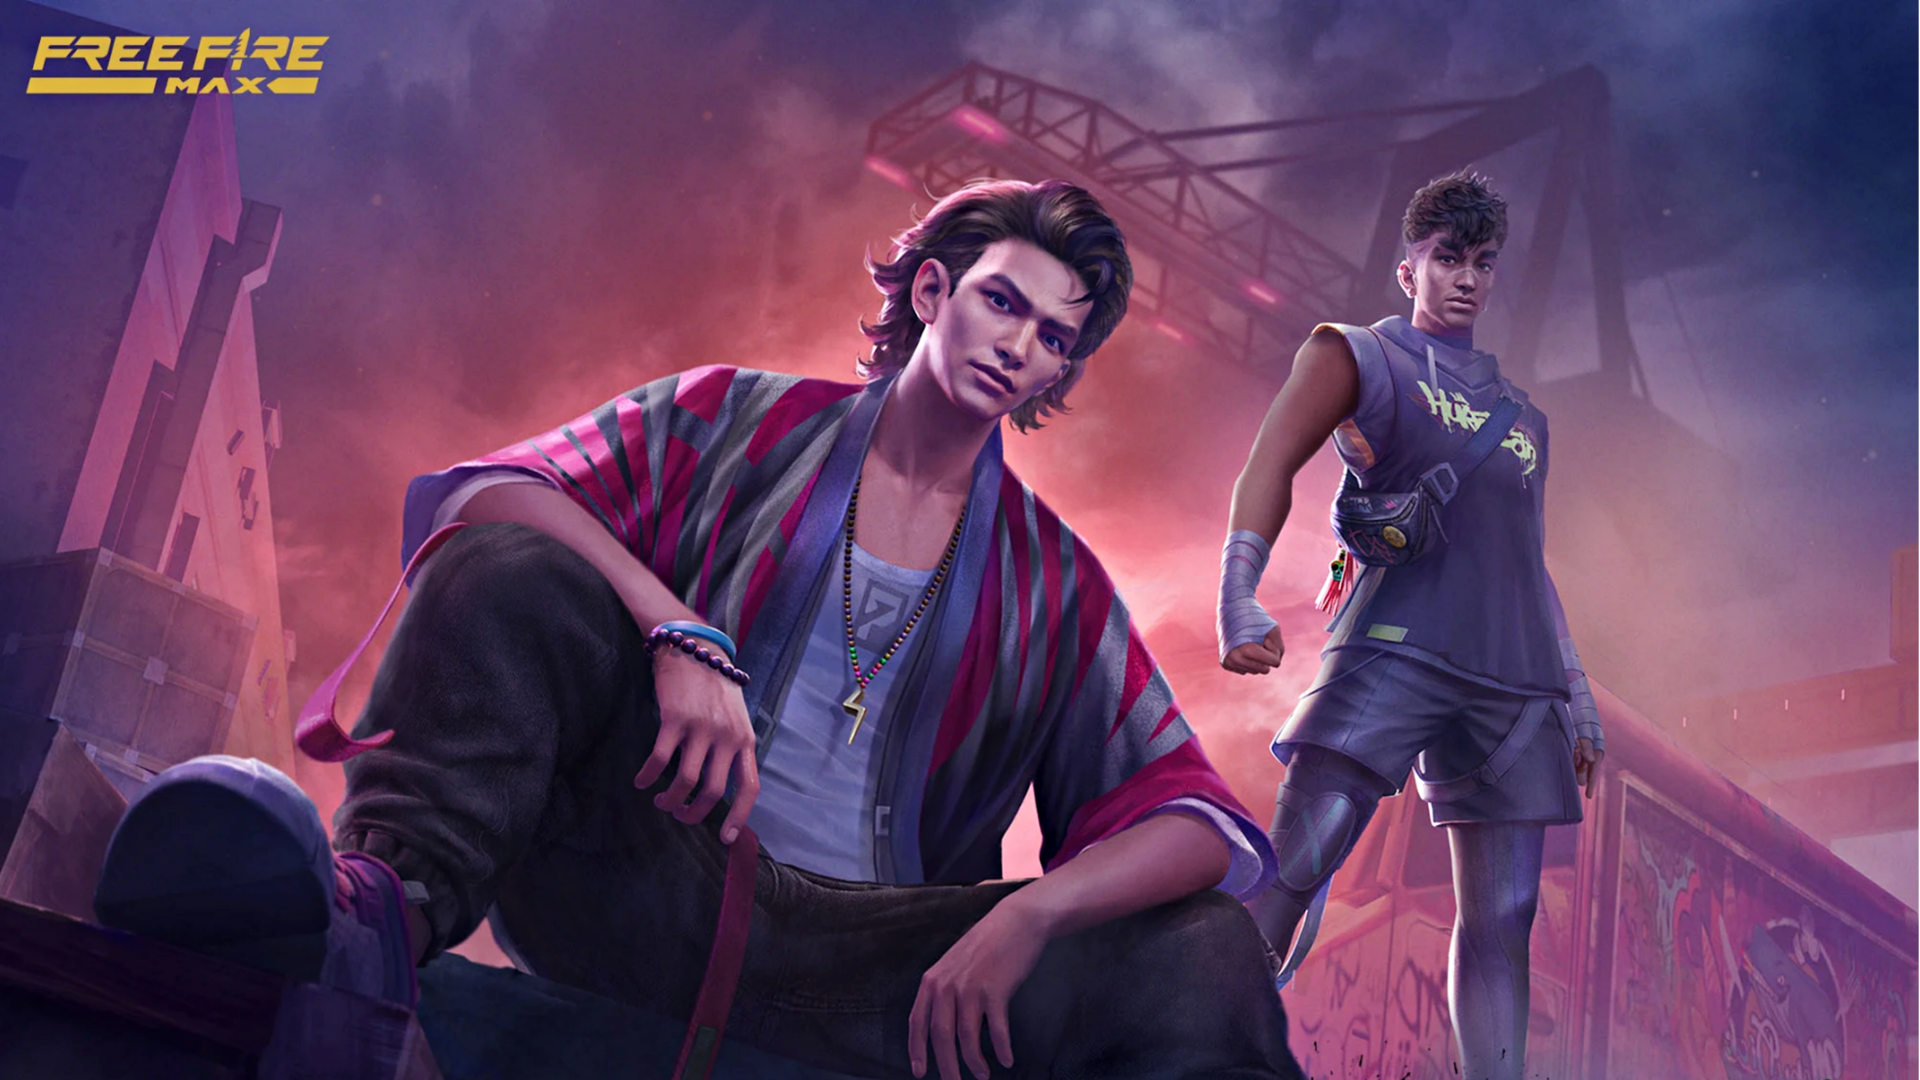 Free Fire MAX codes for November 18: How to redeem?